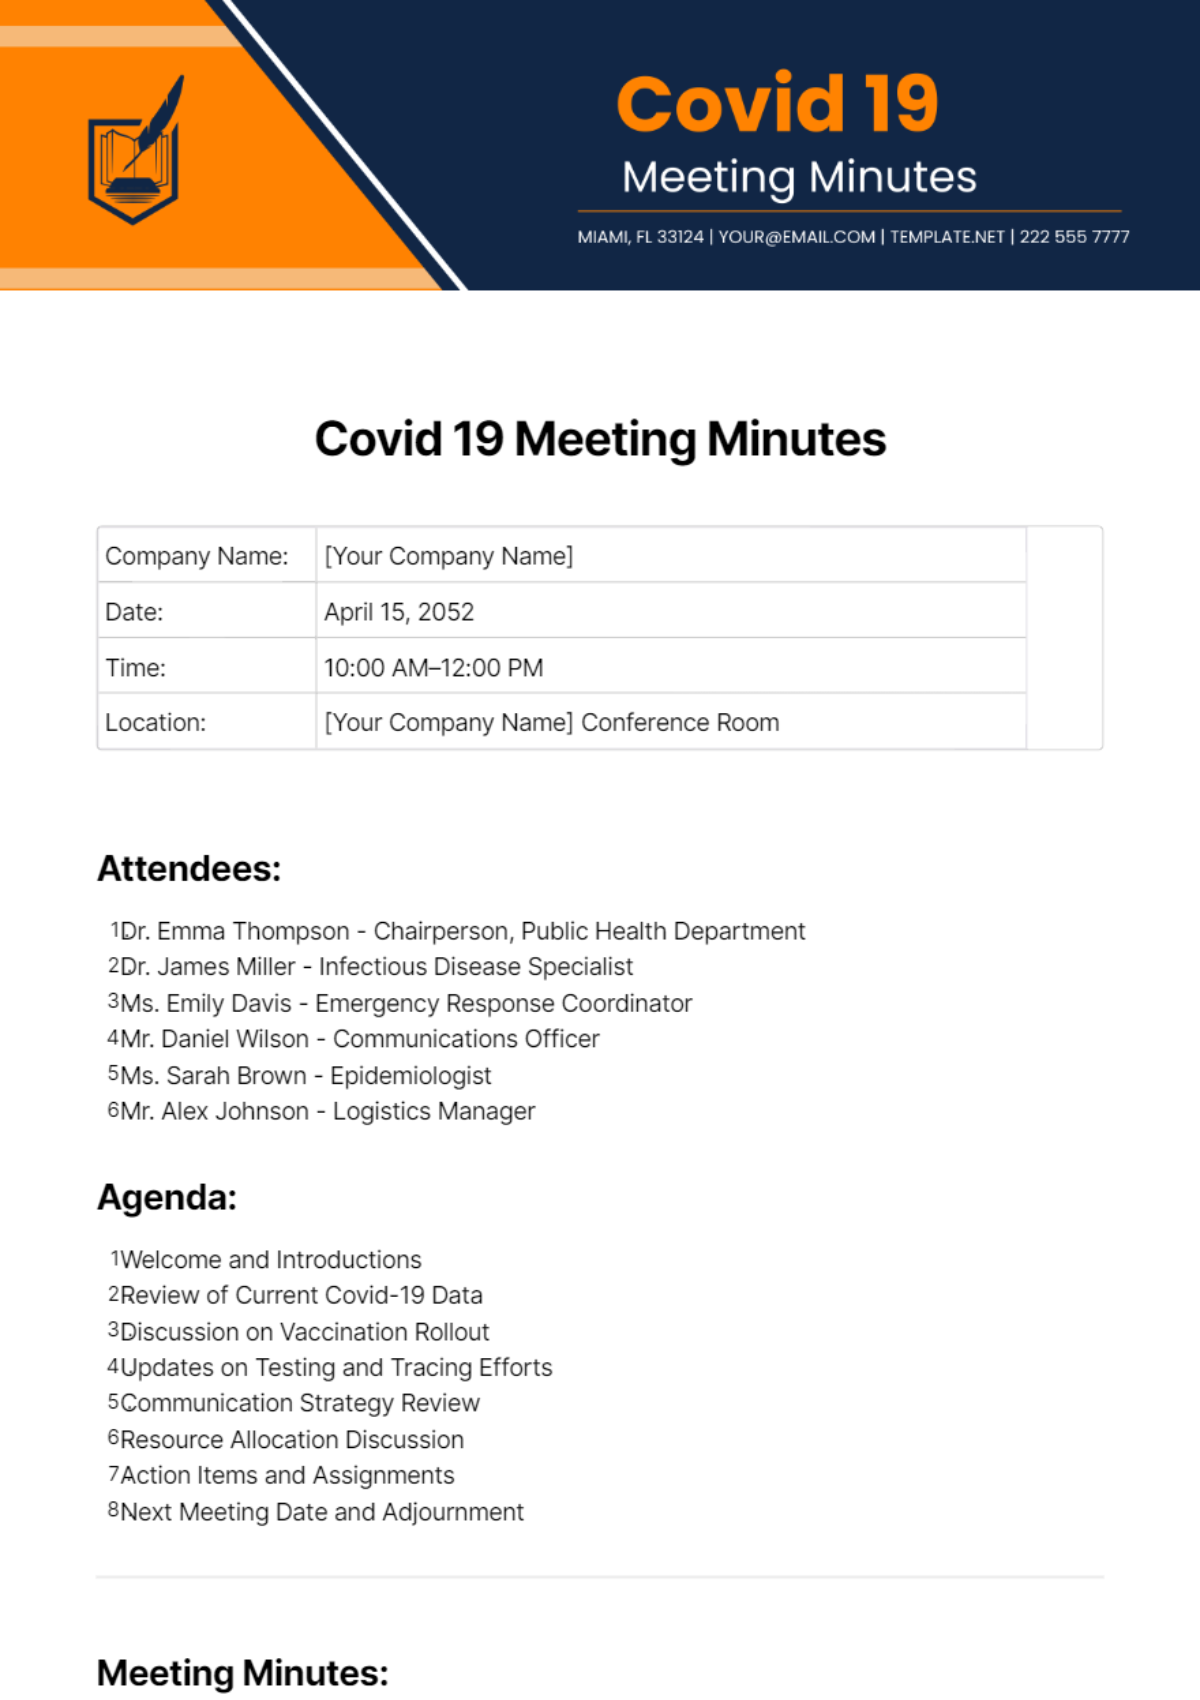 Covid 19 Meeting Minutes Template